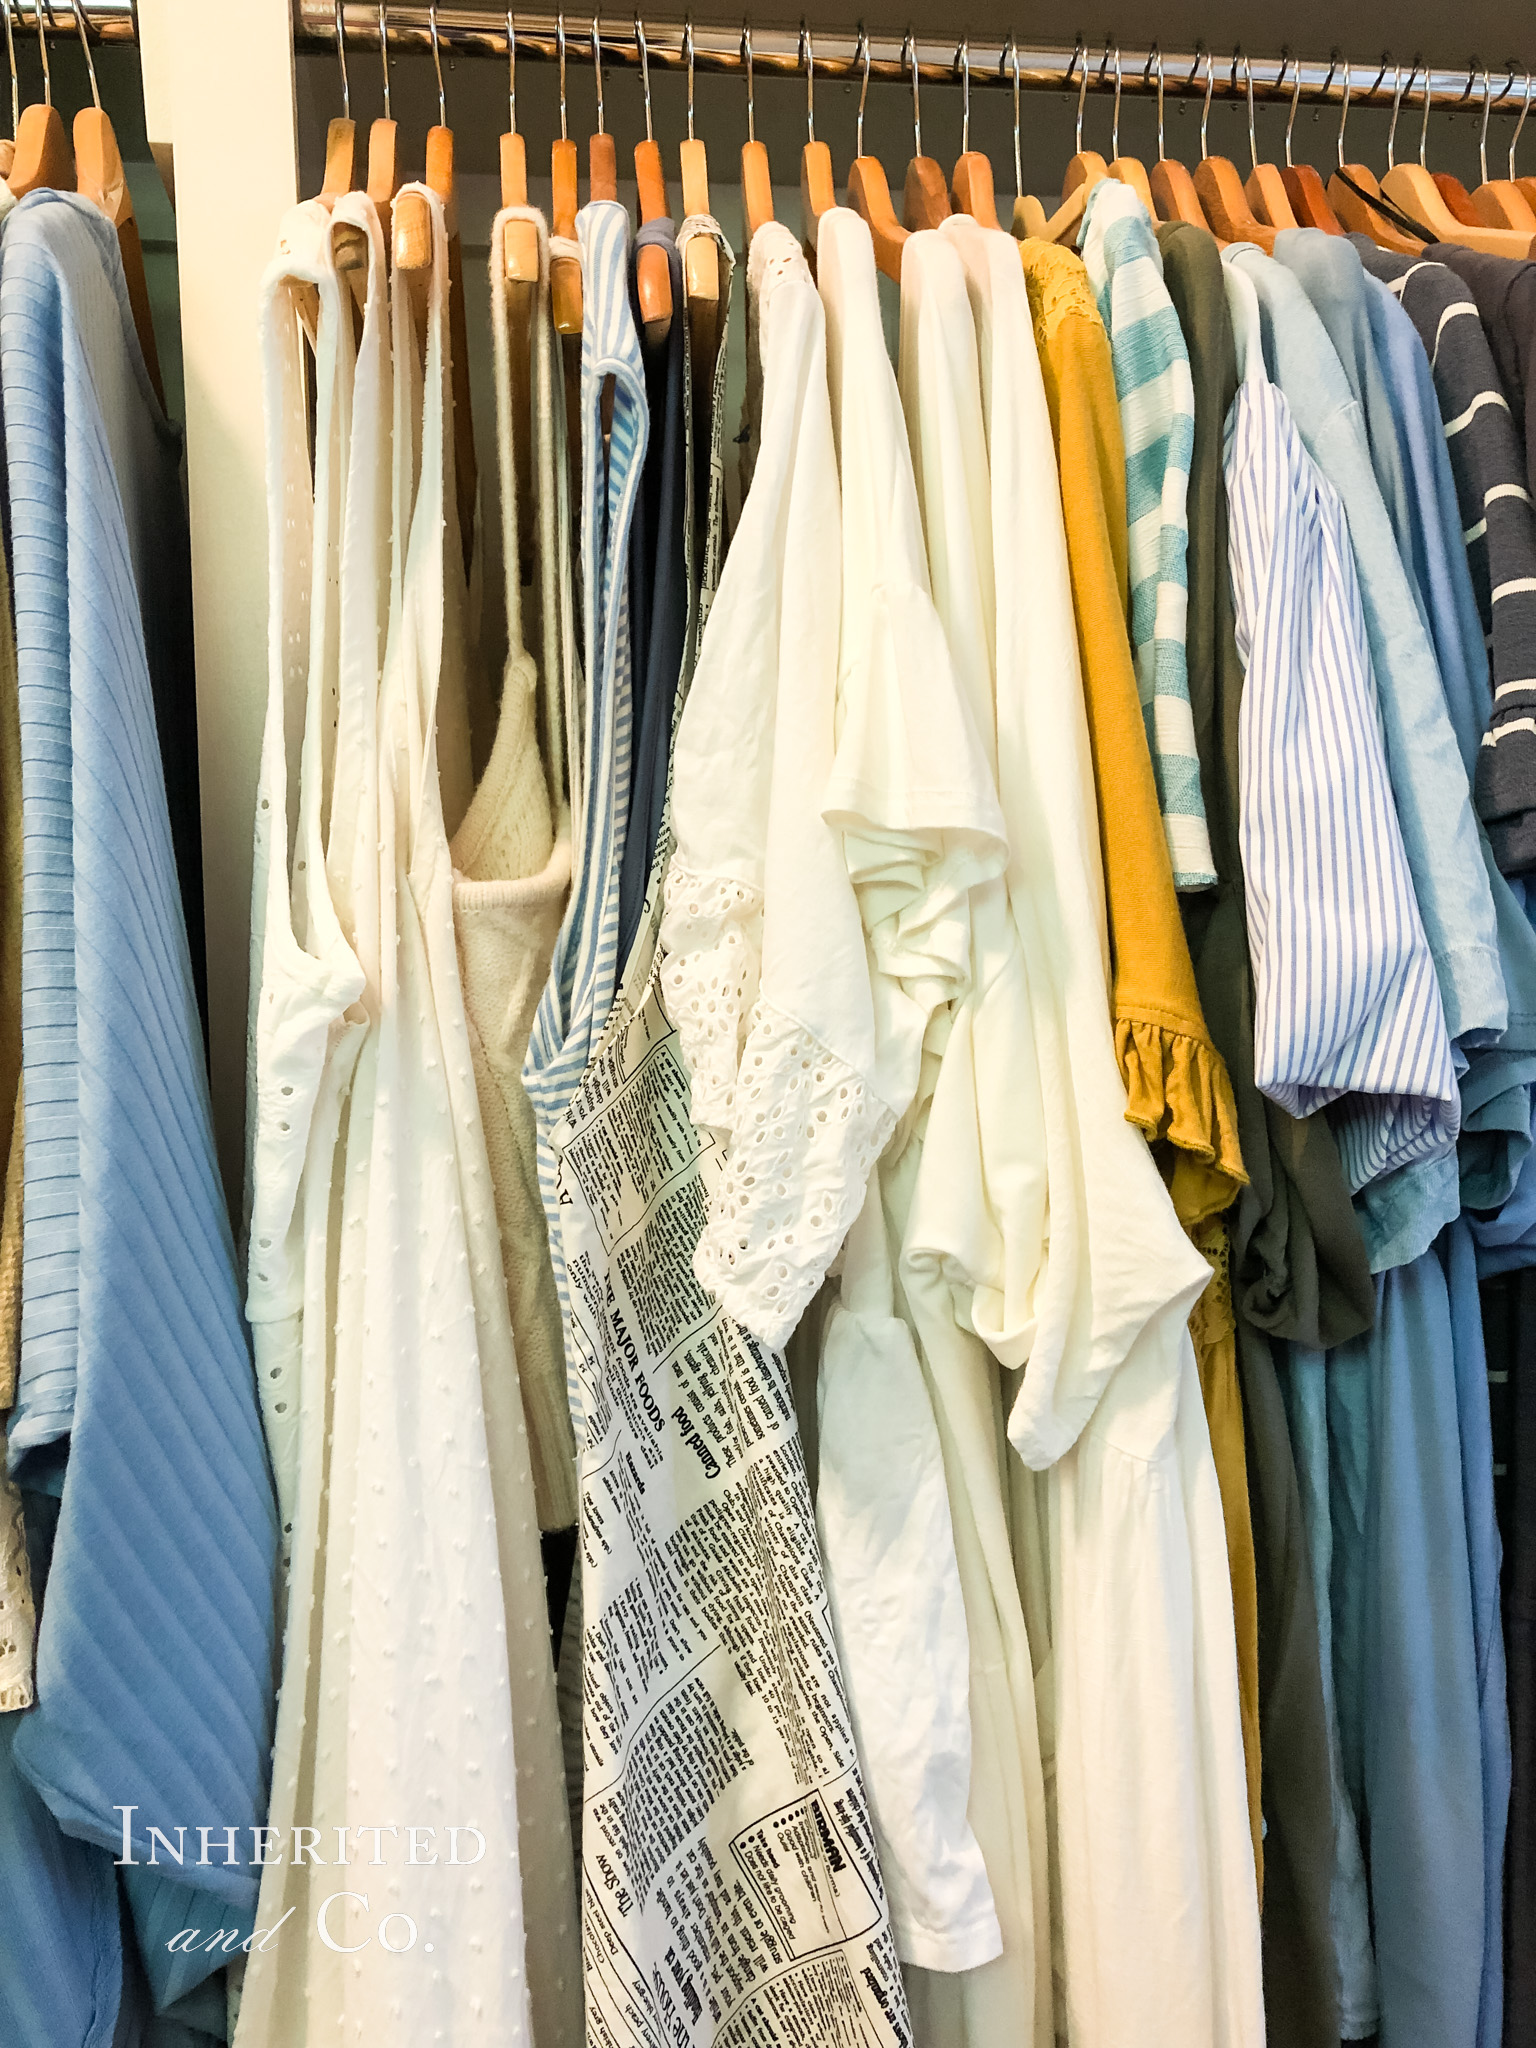 Tops arranged by color in a closet